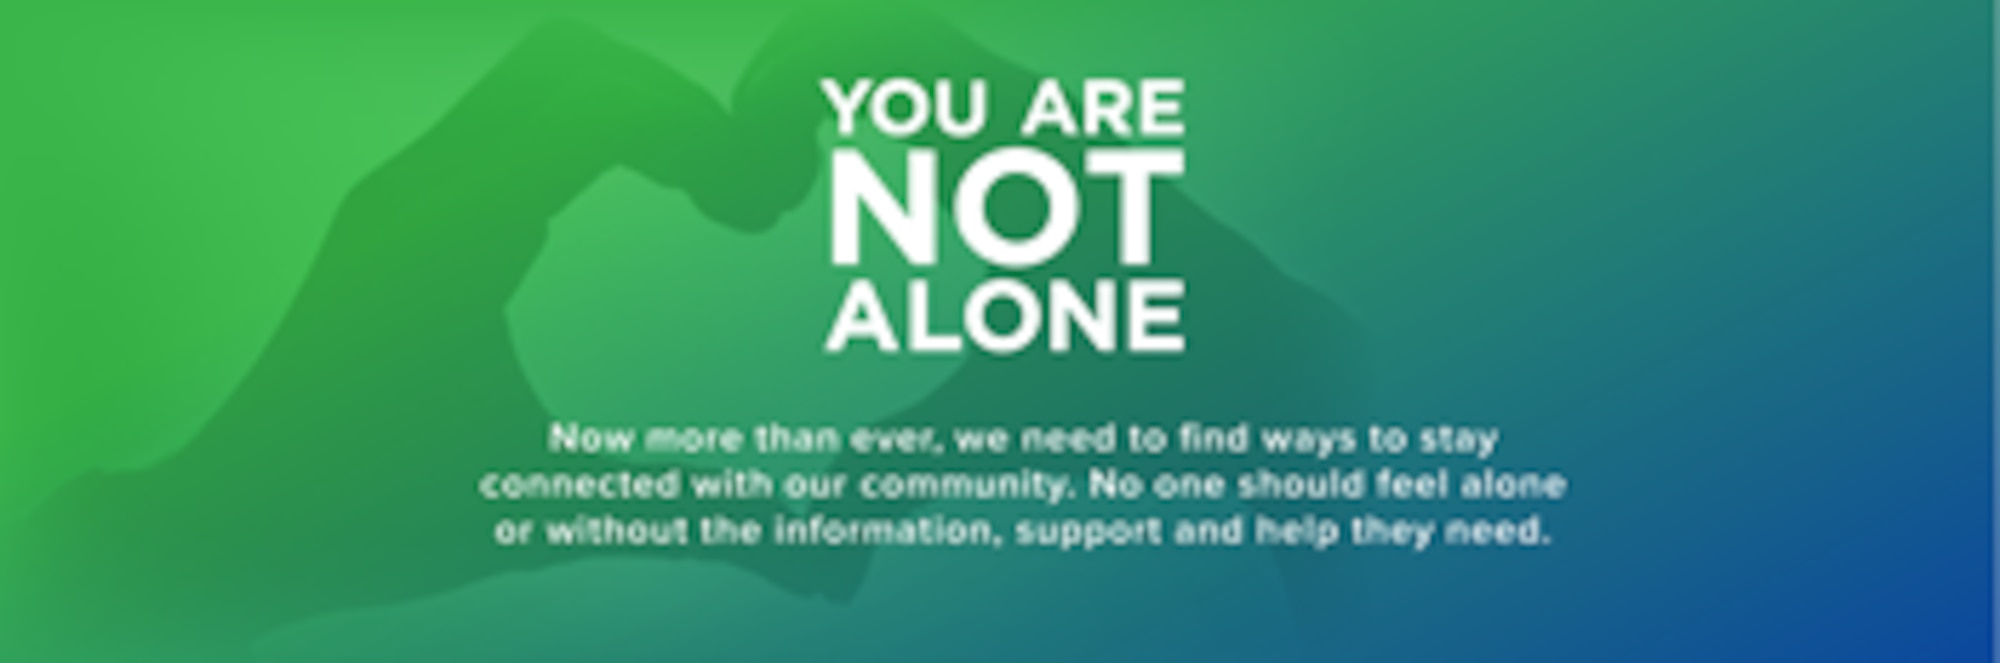 You are not alone graphic.